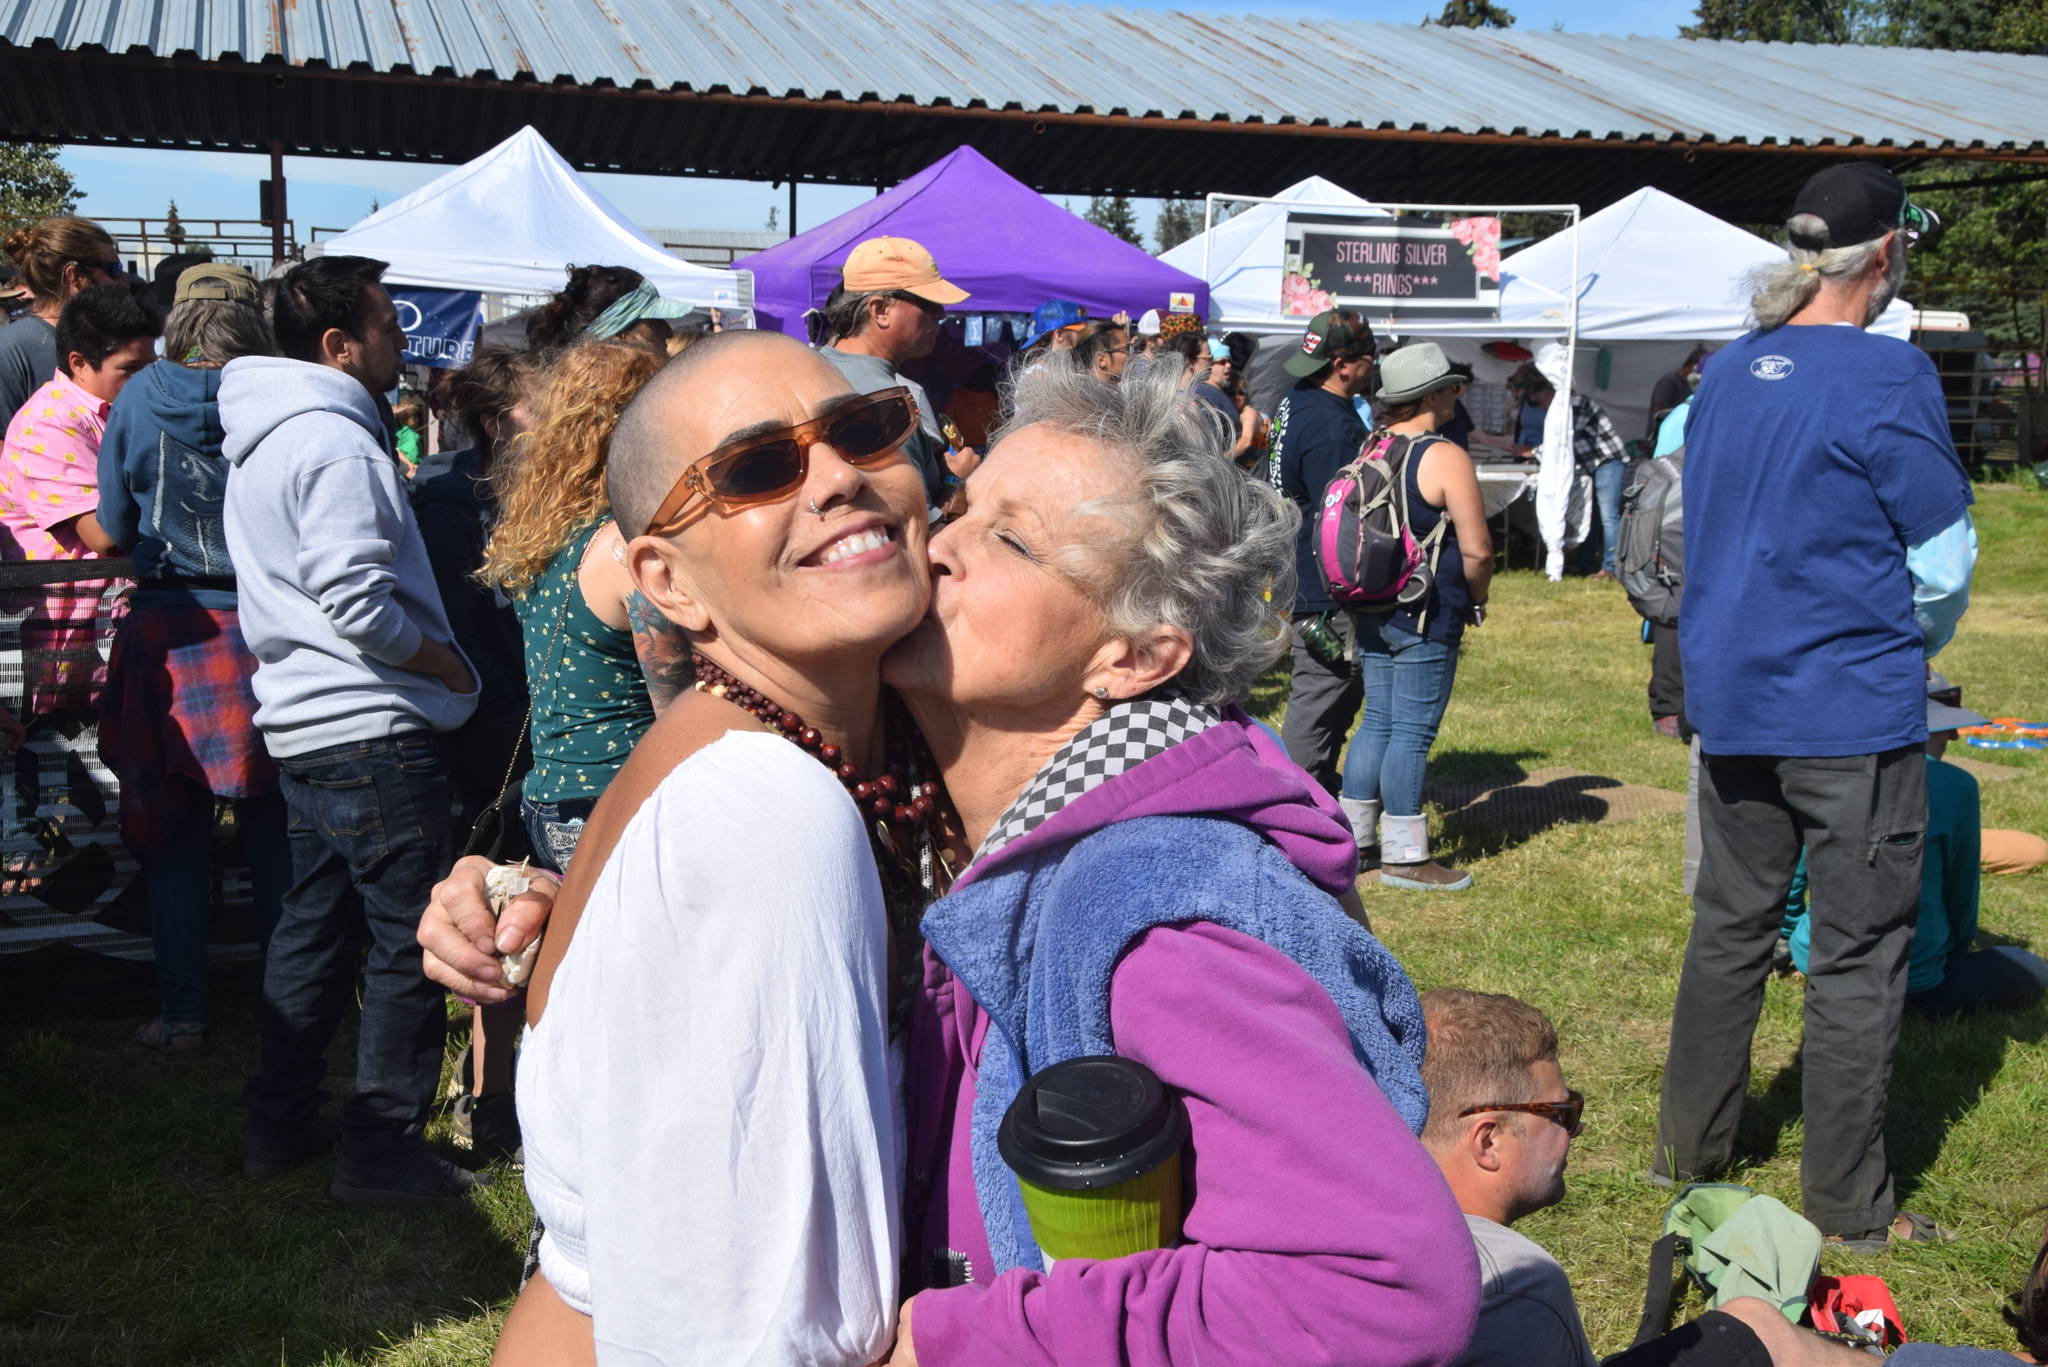 Monet Barbee, left and Judy Casey, right, pose for the camera during Salmonfest 2019 in Ninilchik, Alaska on August 2, 2019. (Photo by Brian Mazurek/Peninsula Clarion)